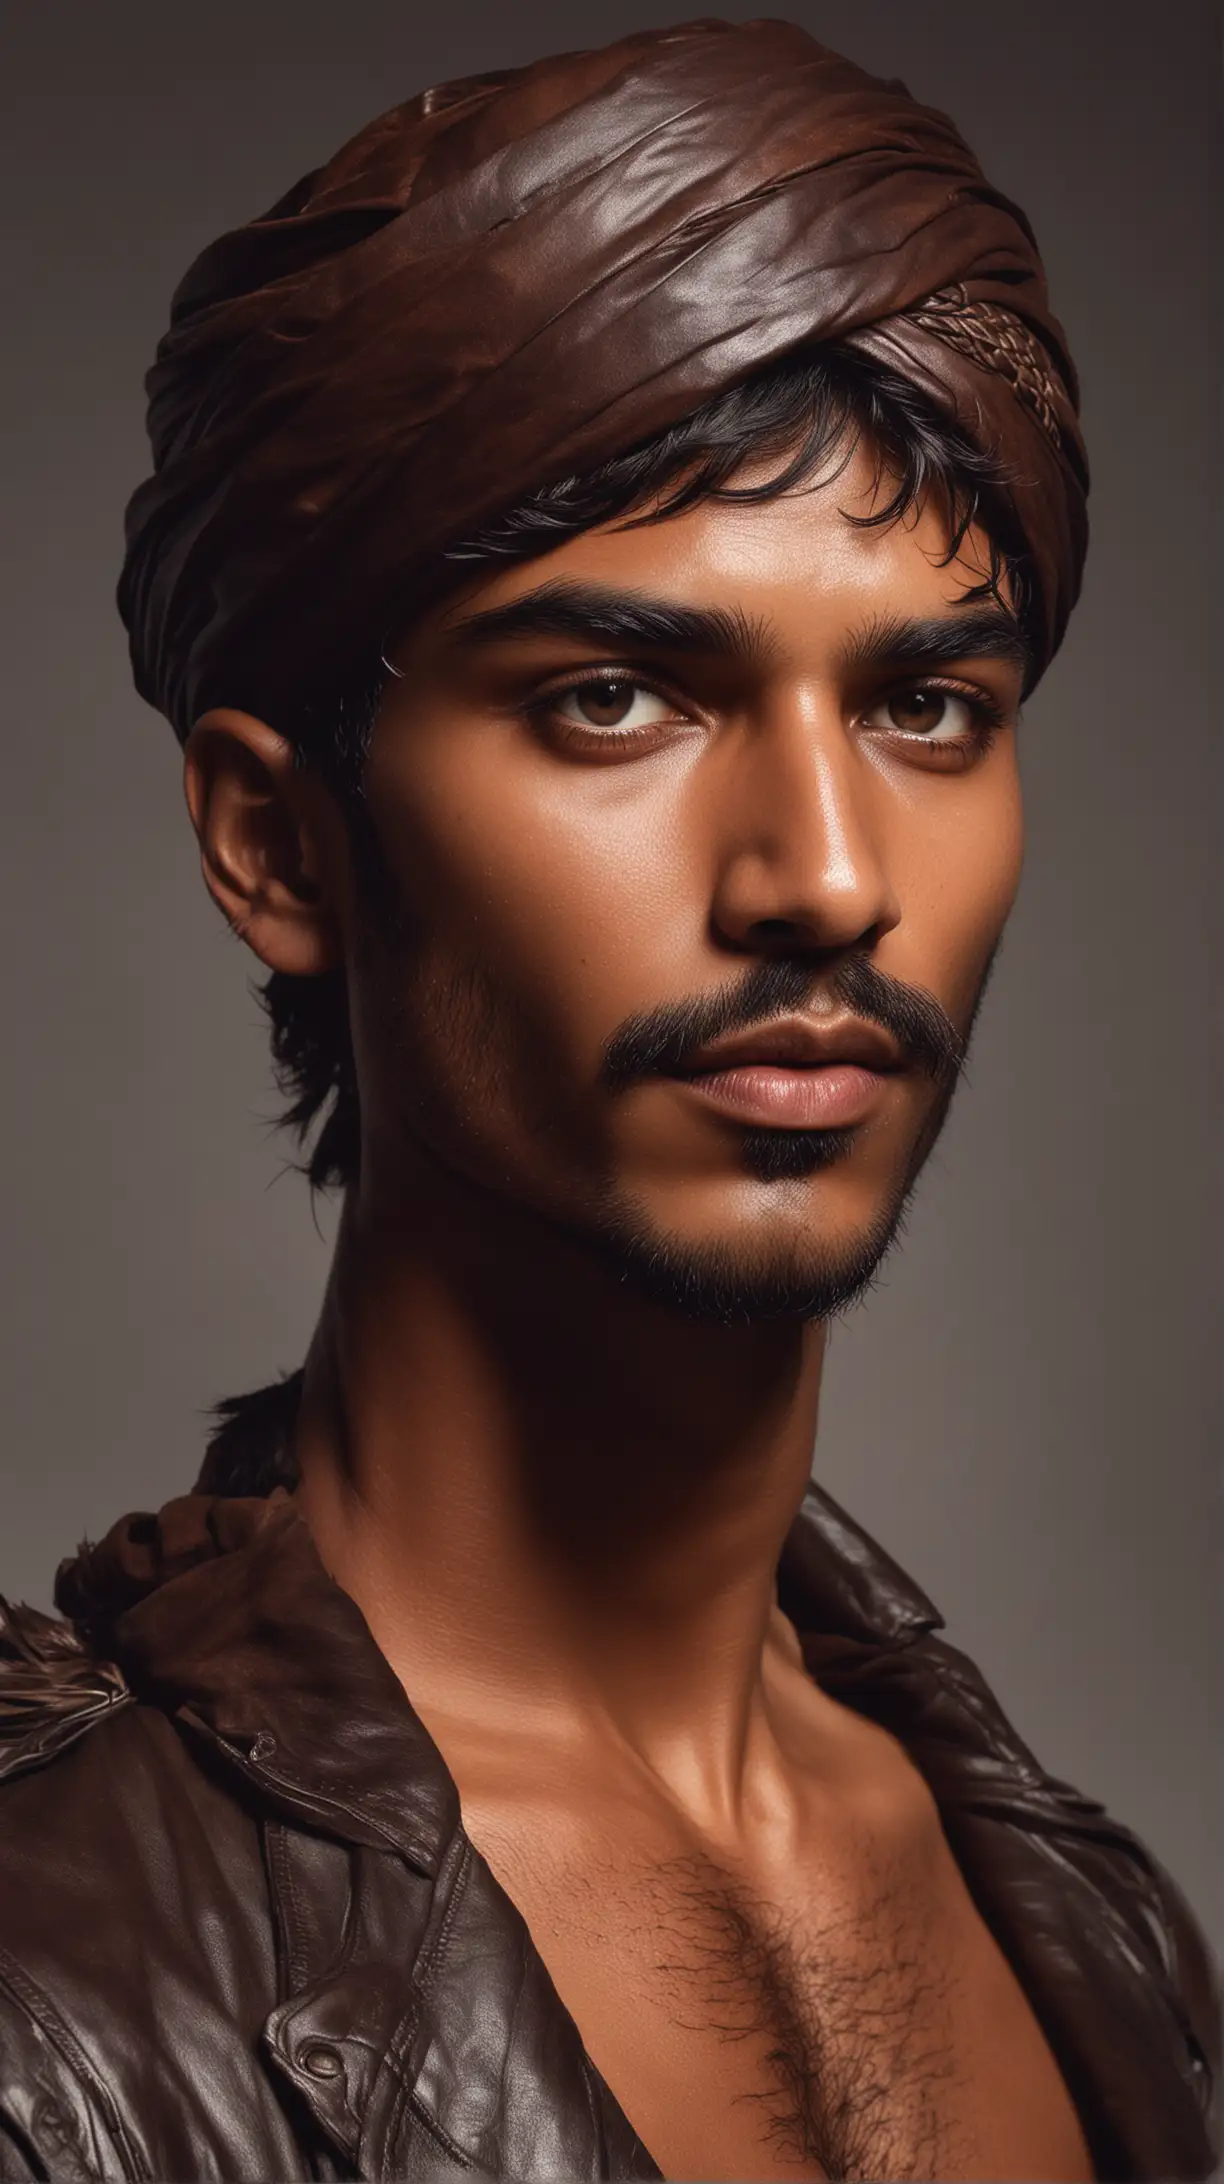 illustration by Daniel Jaems, dynamically posed, rugged masculine queercore hirsute indian man with short hair, turban by Tom Ford, eyeliner, sunkissed deep brown skin,evocative intimate physicality, wearing an outfit made from leather straps and magic , cliff chiang fantasy